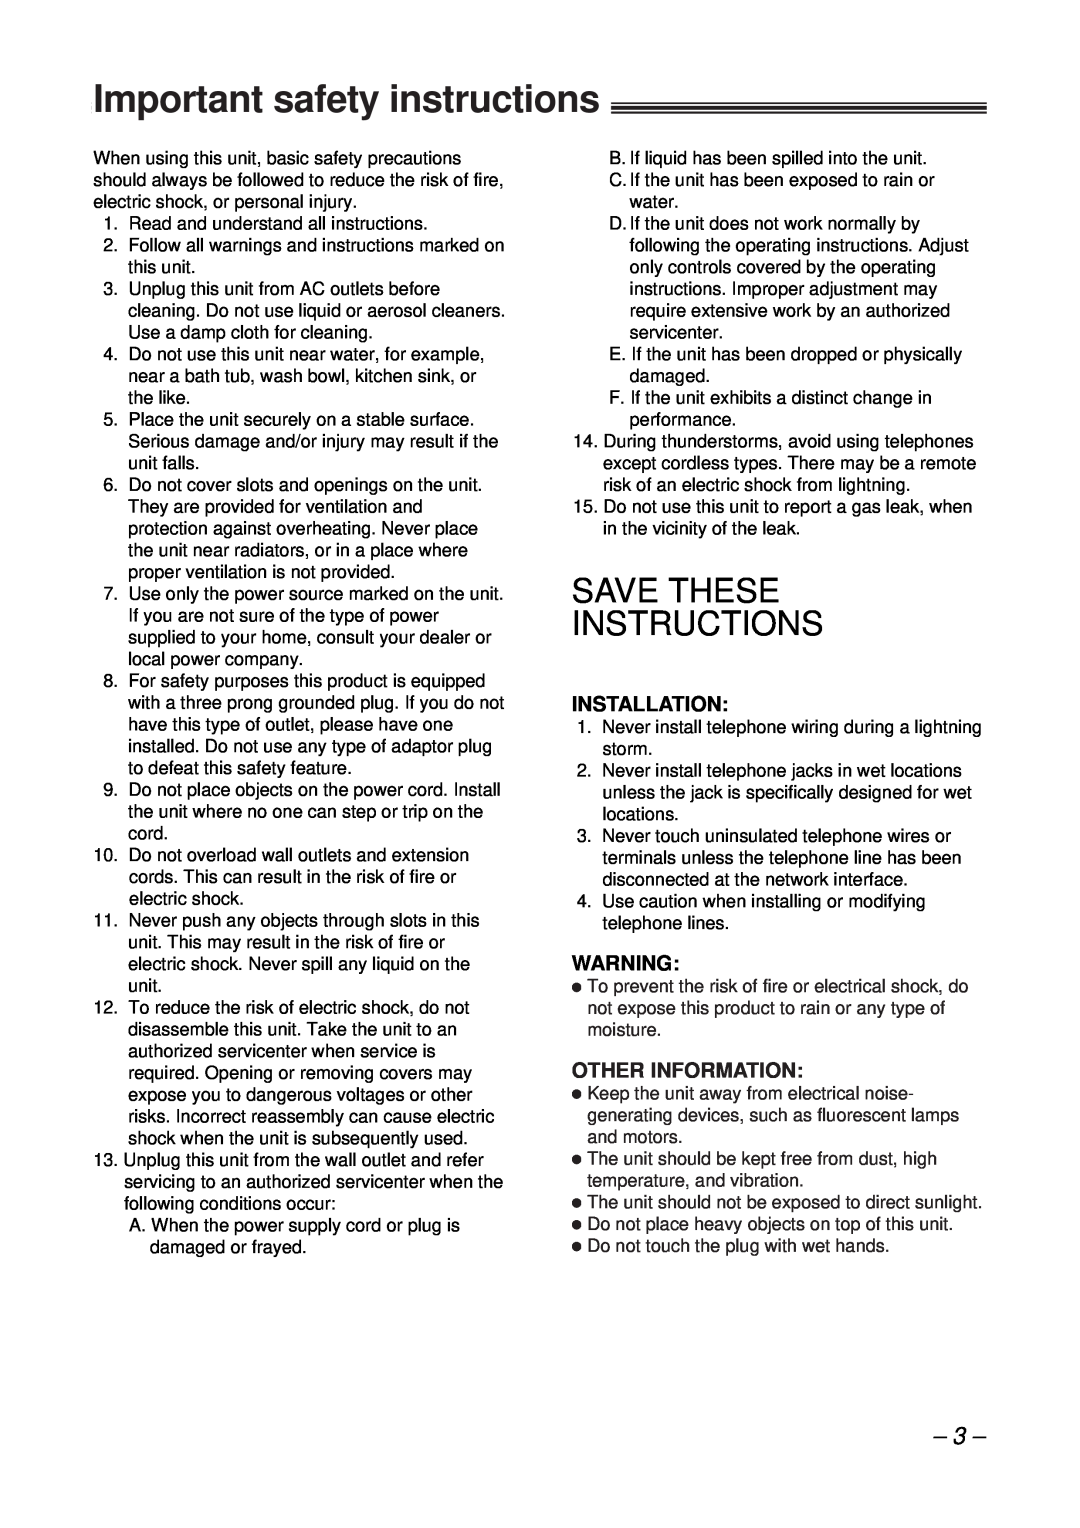 Panasonic KX-FT34HK, KX-FT33HK Important safety instructions, Save These Instructions, Installation, Other Information 